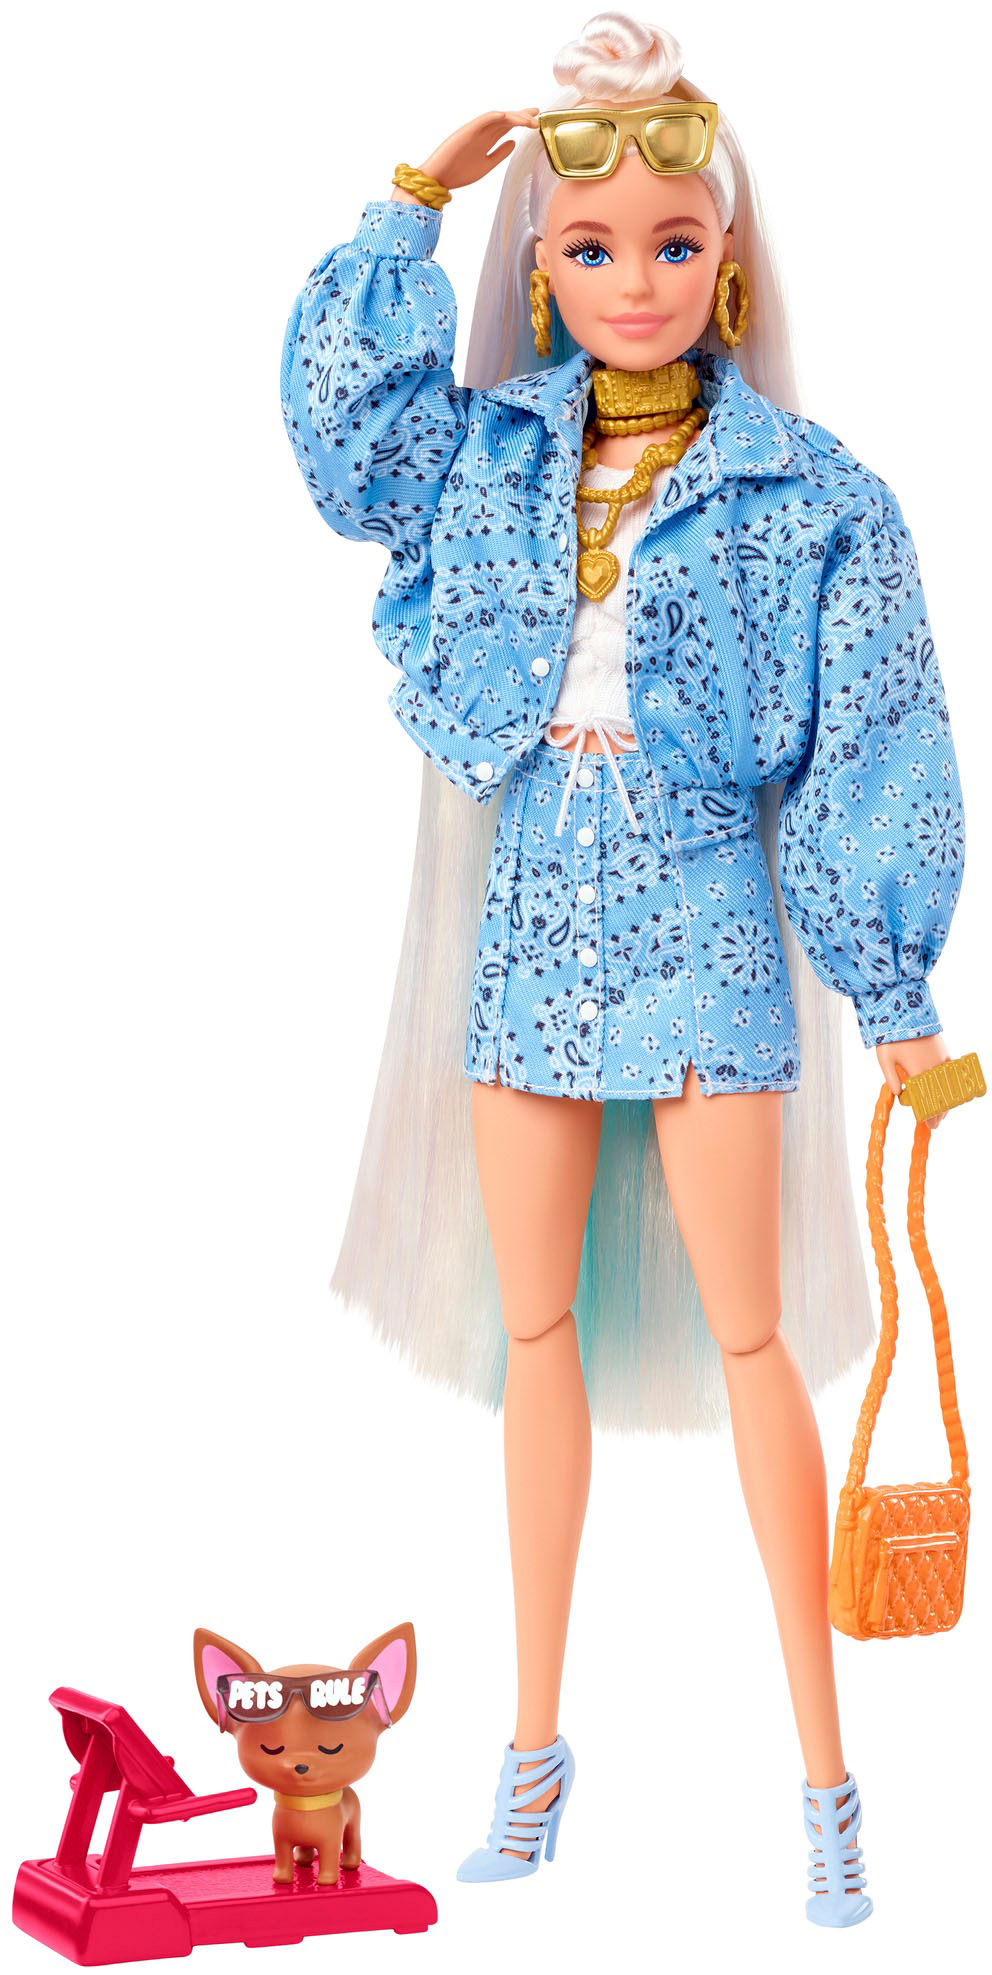 Barbie Signature BarbieStyle Fully Poseable Fashion Doll (12-in Blonde)  with Dress, Top, Pants, 2 Jackets, 2 Pairs of Shoes & Accessories 